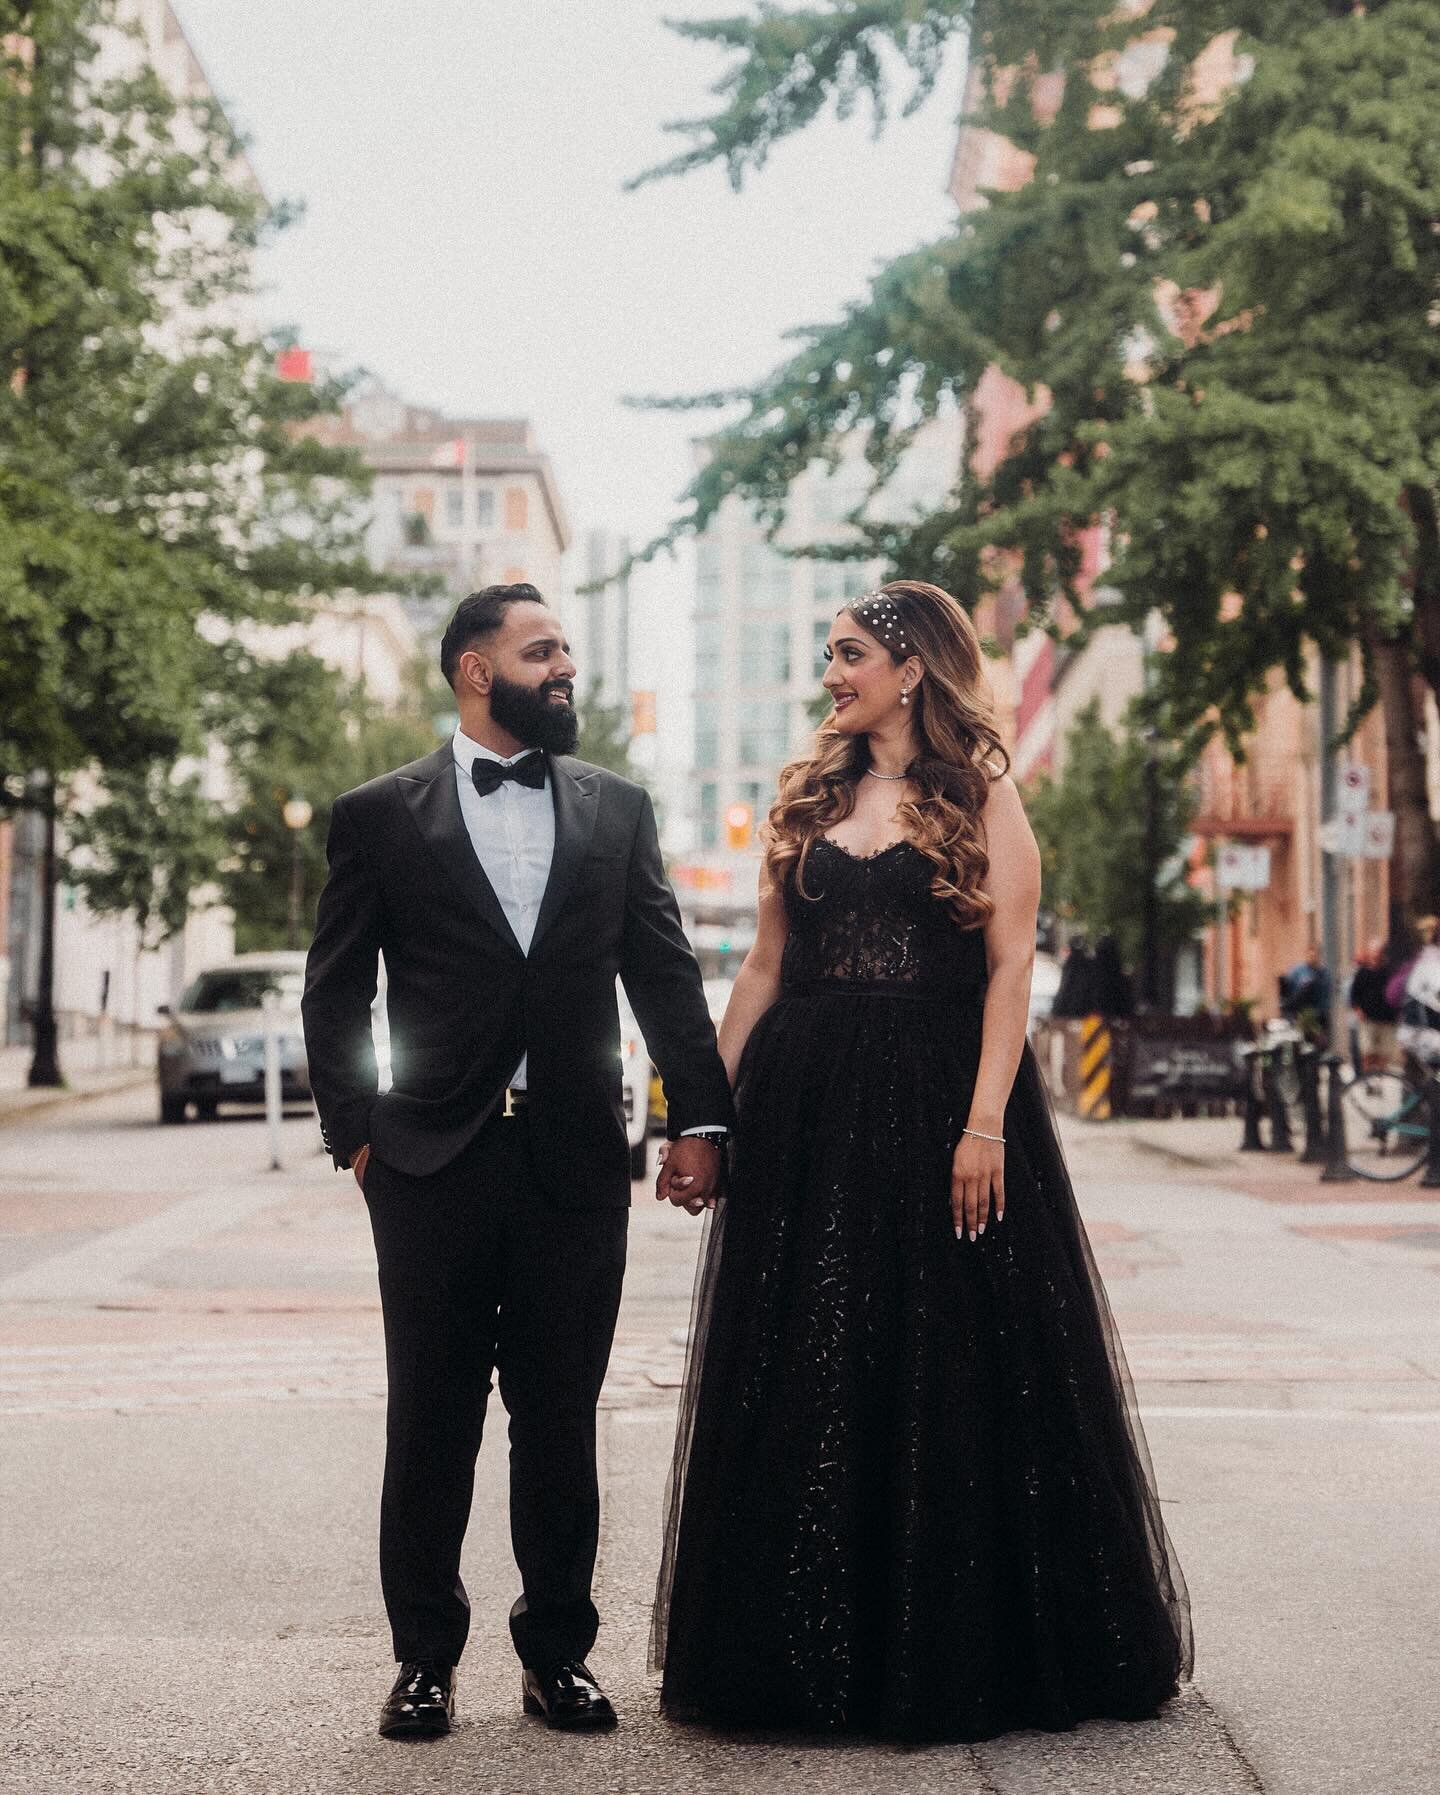 One of my favourite shoots with Inder and Monika. 

We started the shoot off in Gastown where we were supposed to go to a rooftop parkade, but they were closed. We made the best of it and started on the ground, using the beautiful Gastown as our back